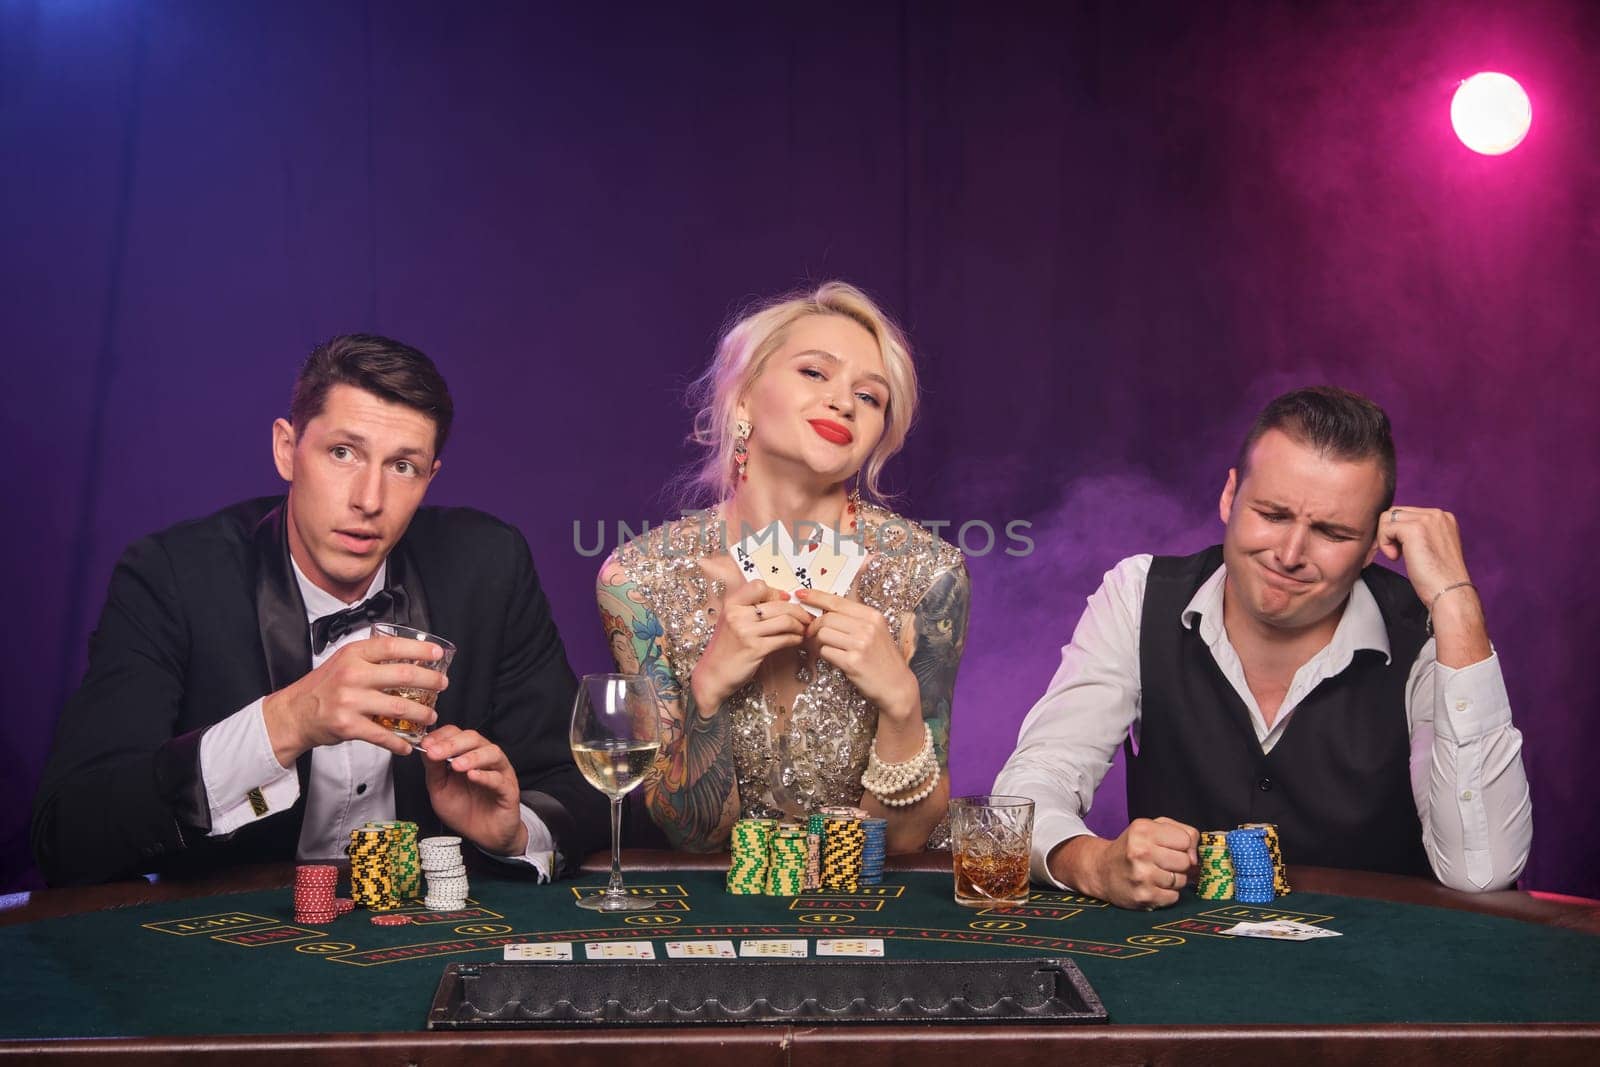 Two rich fellows and elegant lady are playing poker at casino. Youth are making bets waiting for a big win. They are looking unhappy sitting at the table against a red and blue backlights on black smoke background. Cards, chips, money, gambling, entertainment concept.